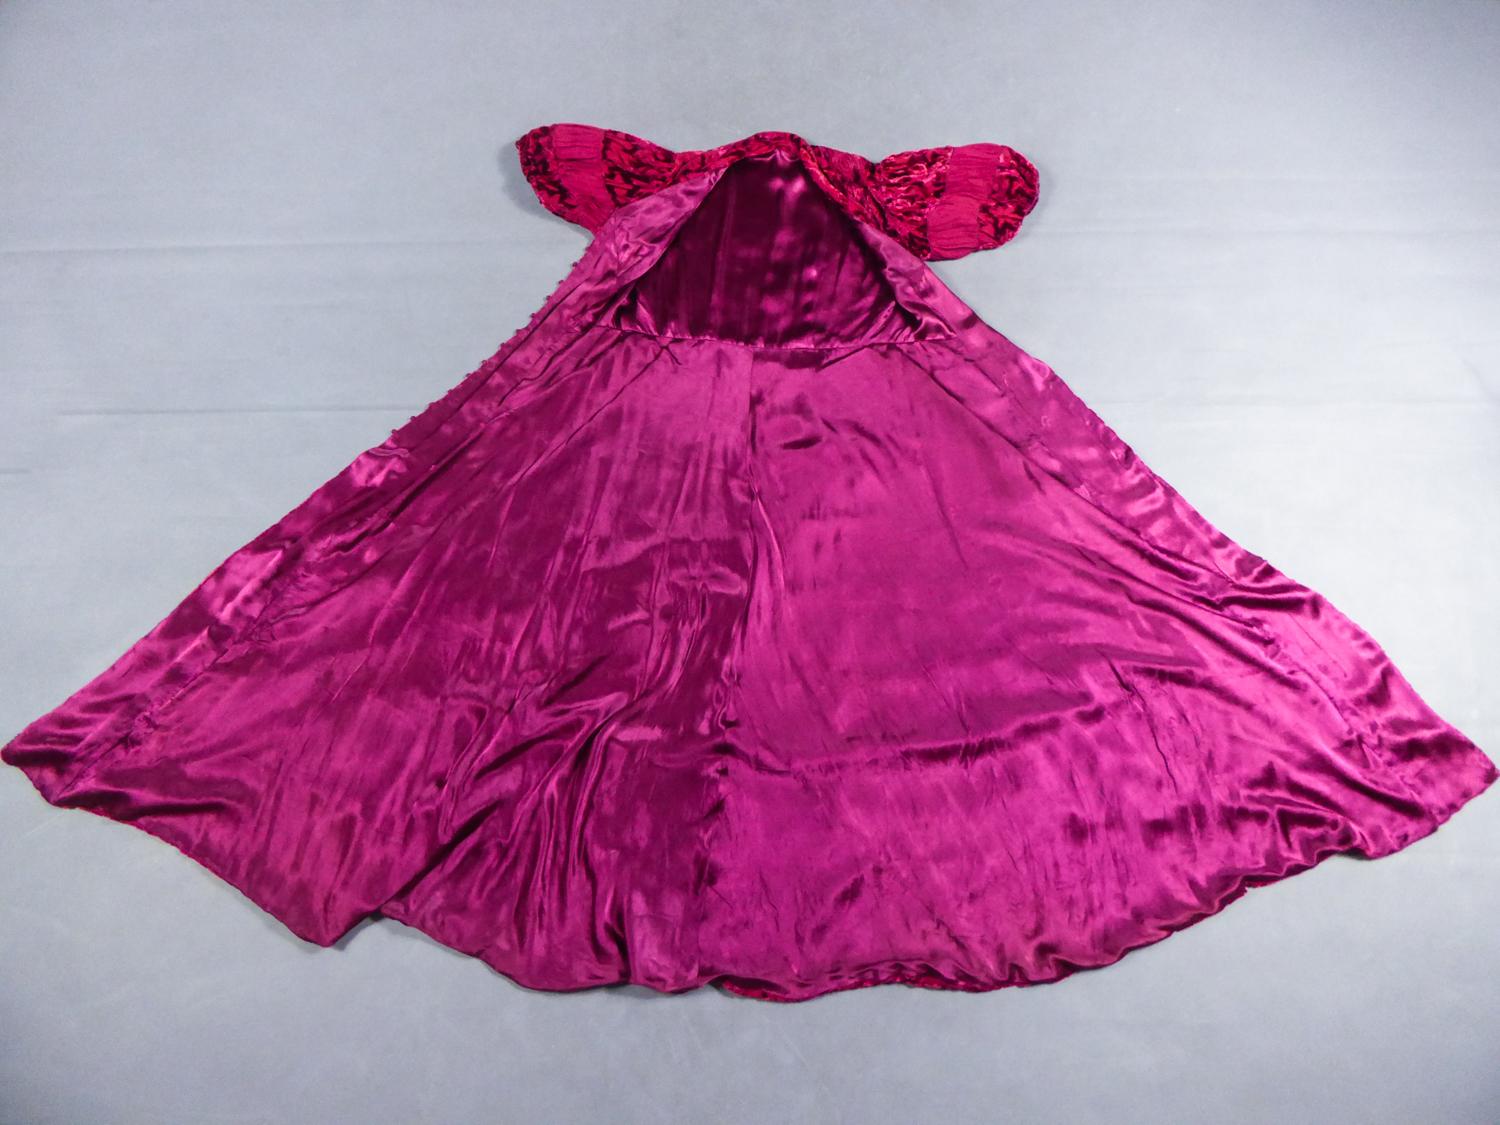 Circa 1940/1950

France

Beautiful evening coat dress in devoré velvet and silk crepe Fuschia dating from the Second World War. No labelled. Strips of devoré silk velvet with Art Deco flower motifs, alternating with a matching silk crepe highlighted